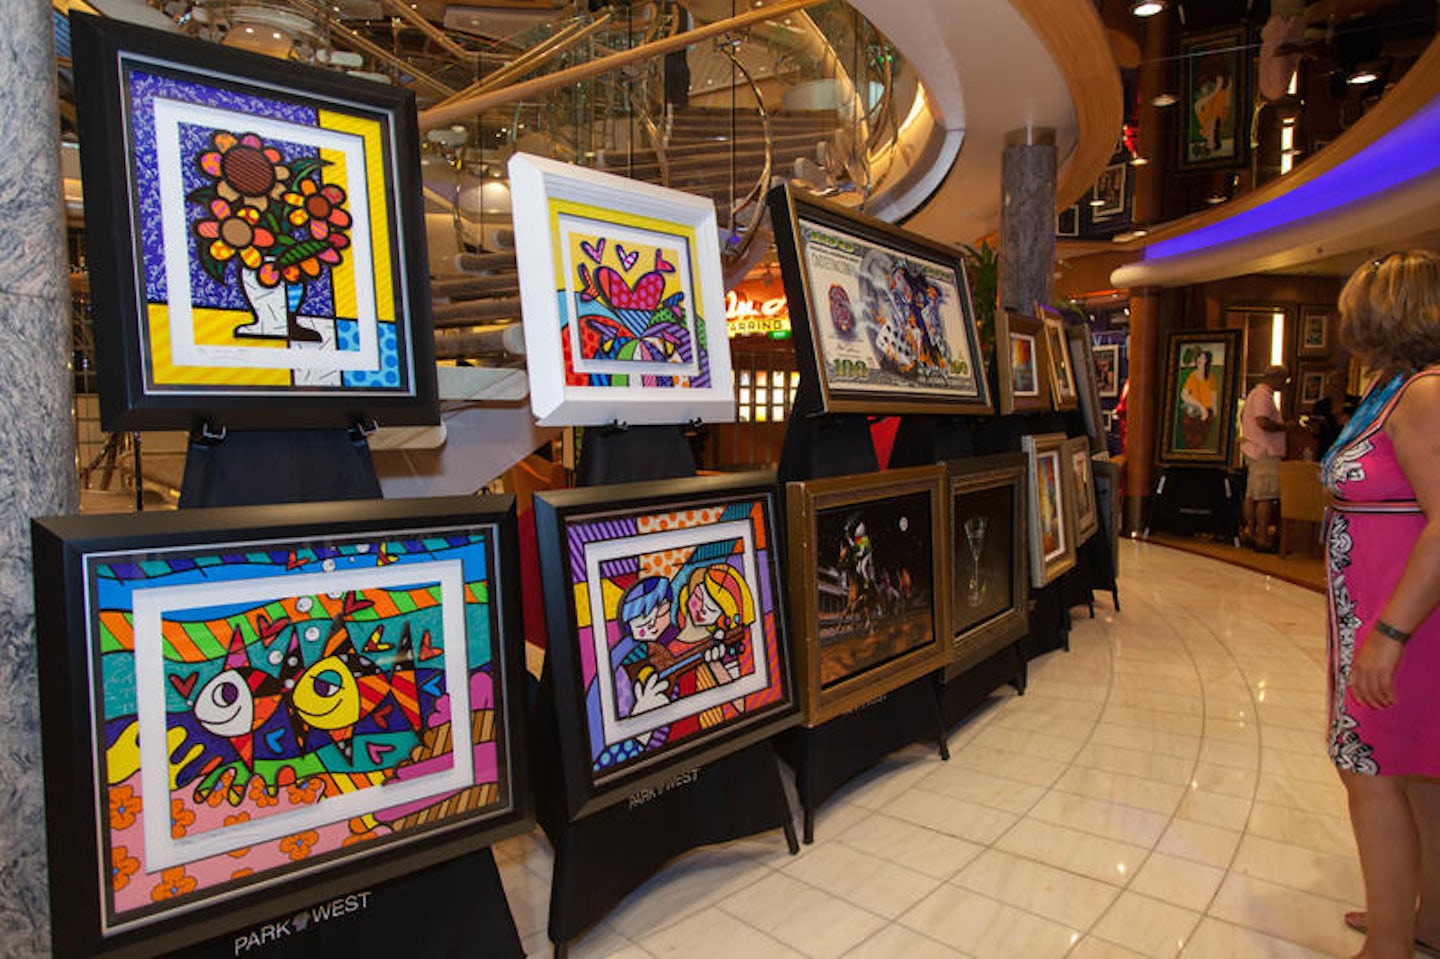 Art Gallery on Independence of the Seas